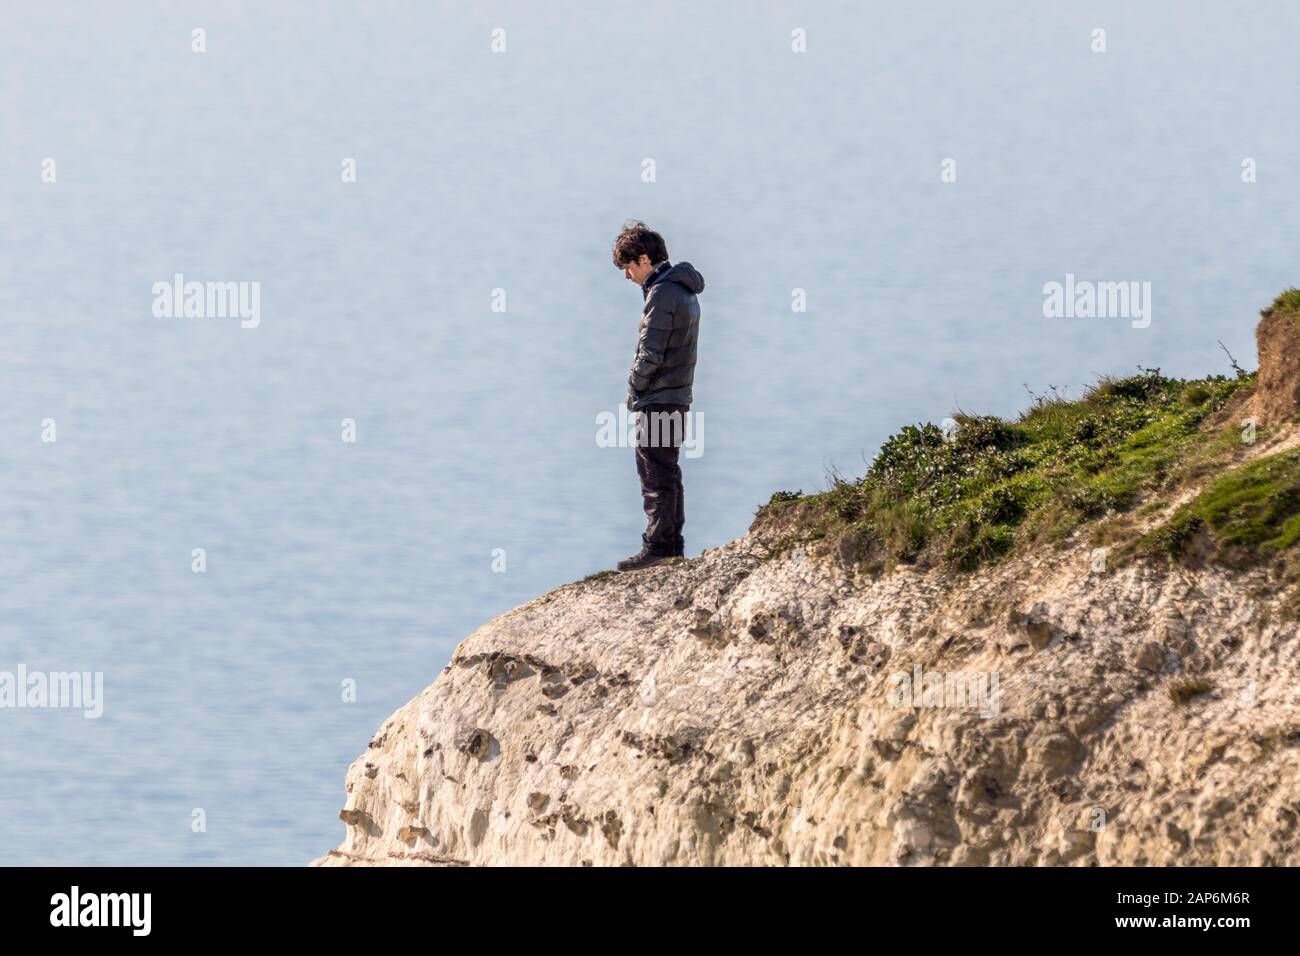 Base jumper prepares to leap off the 400ft cliffs at Beachy Head by standing on the cliff edge. Stock Photo